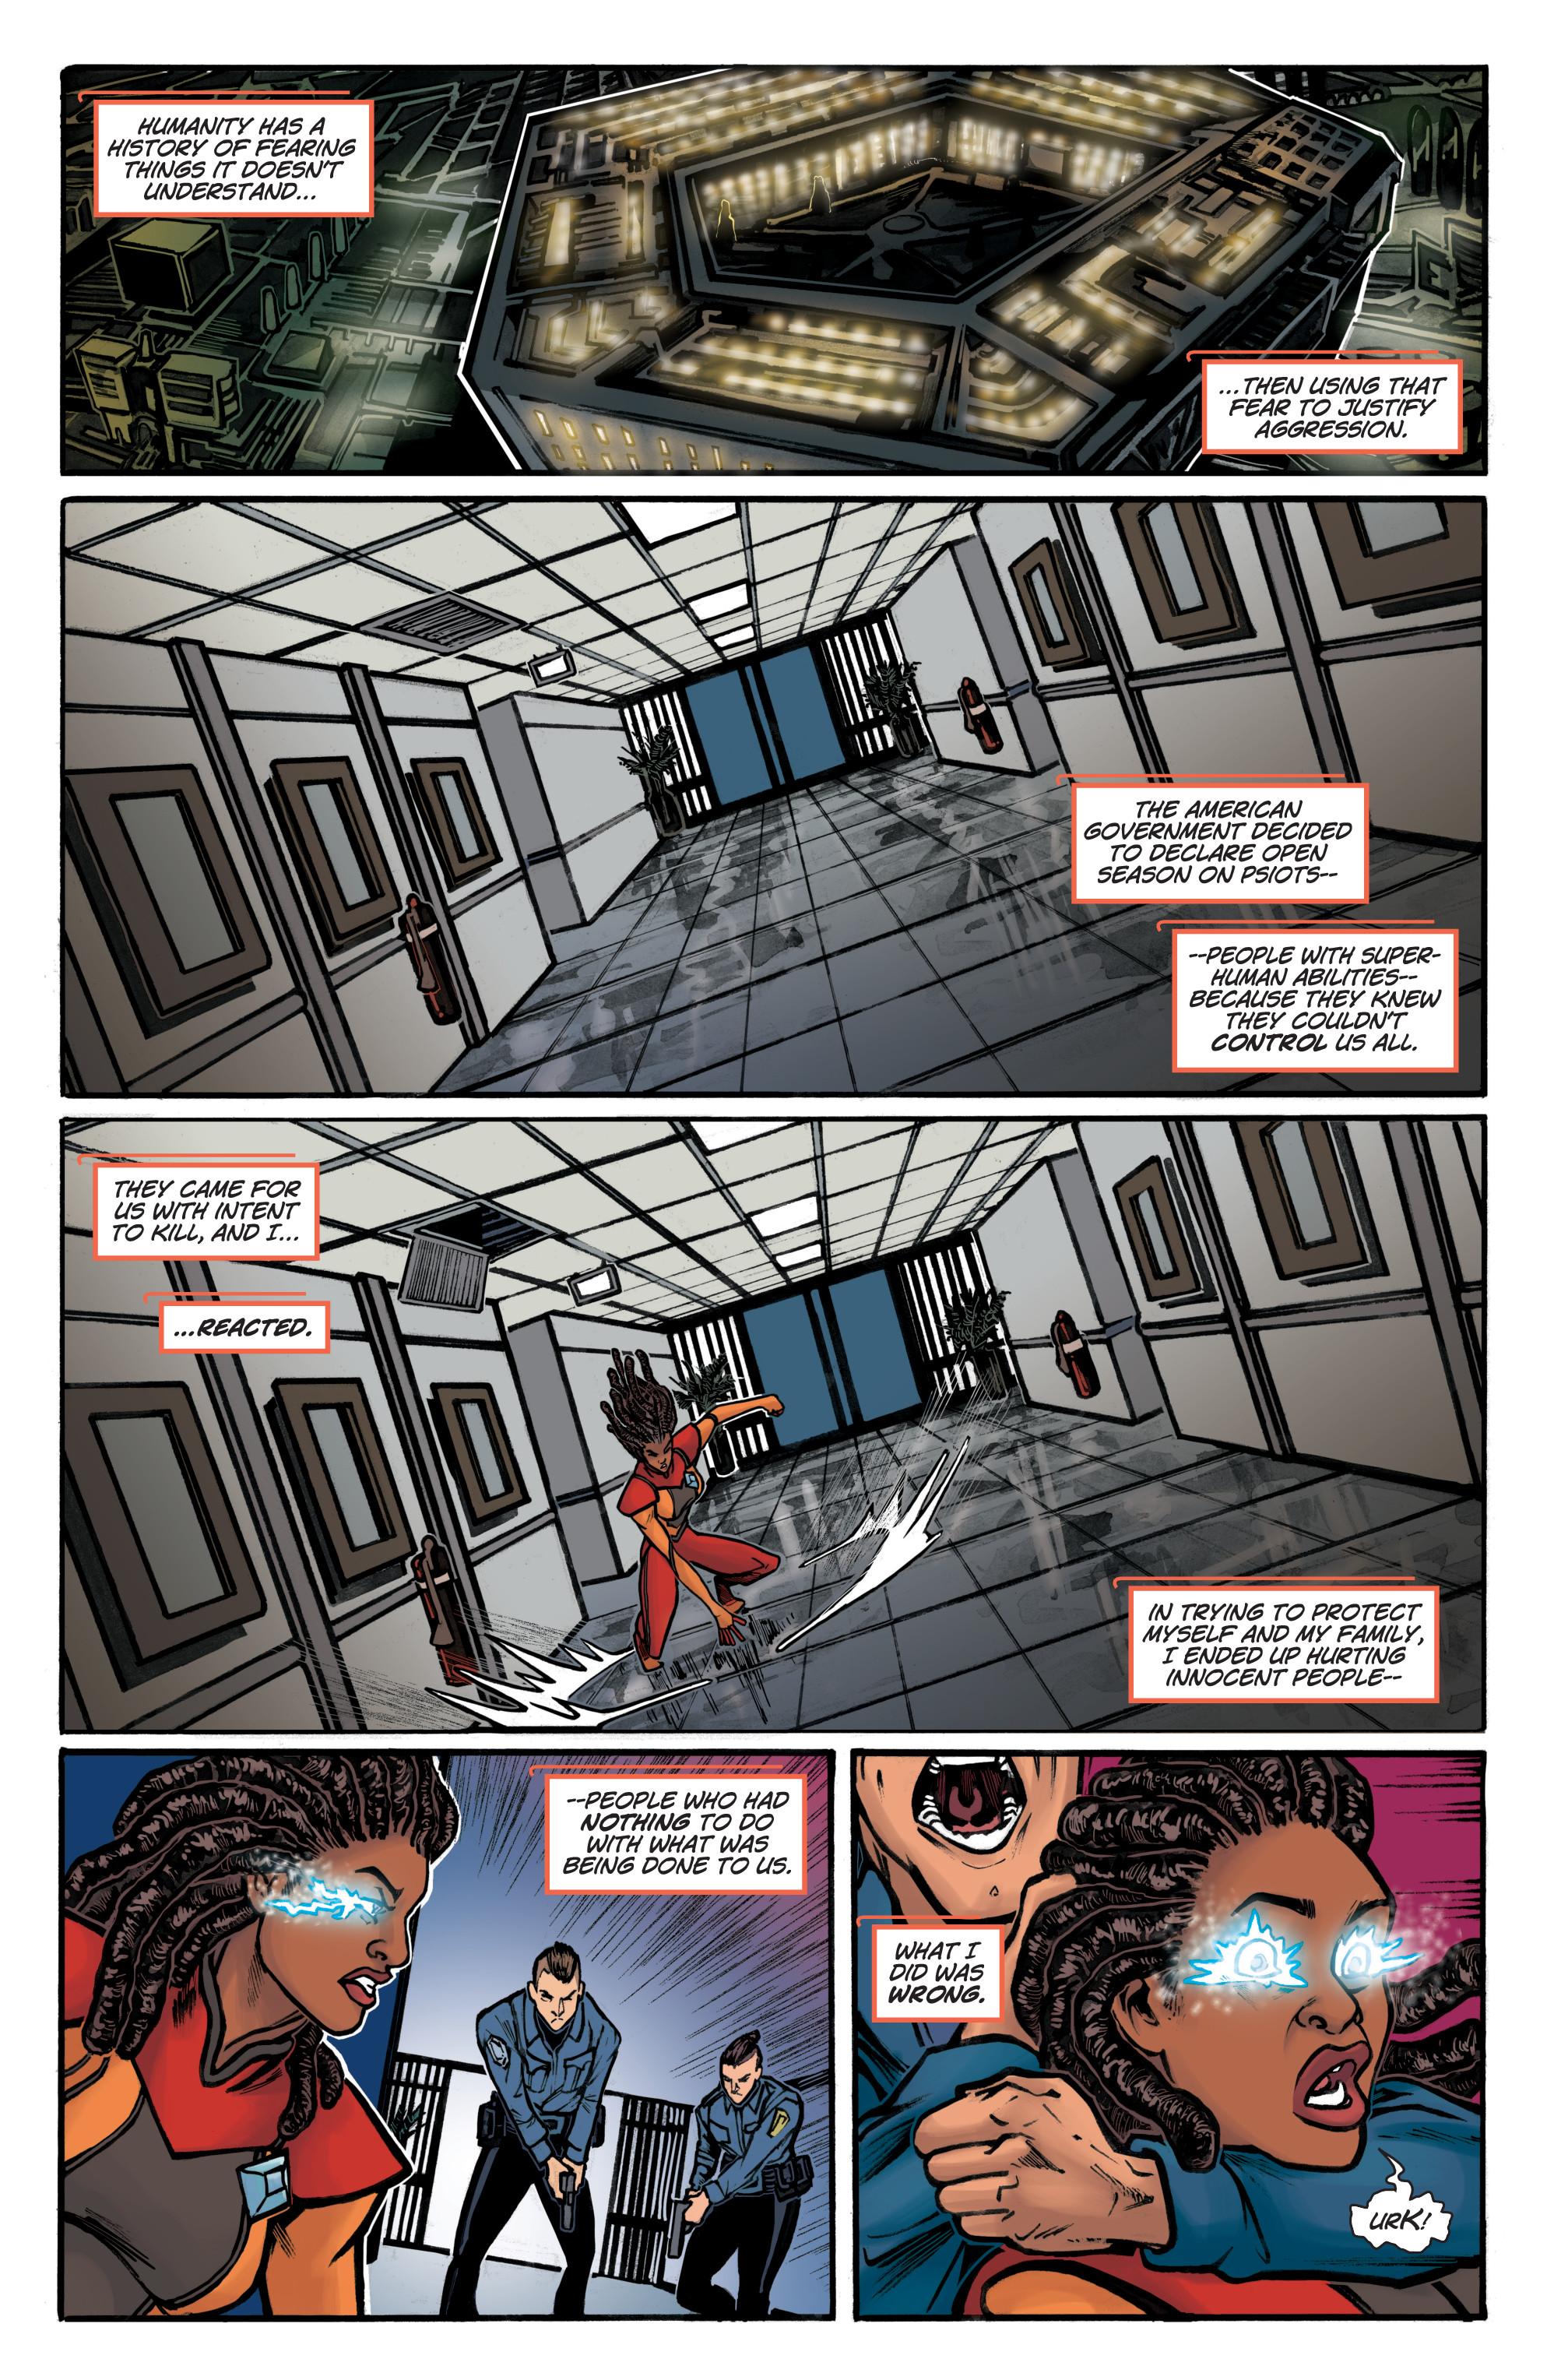 Livewire (2018-): Chapter 9 - Page 3